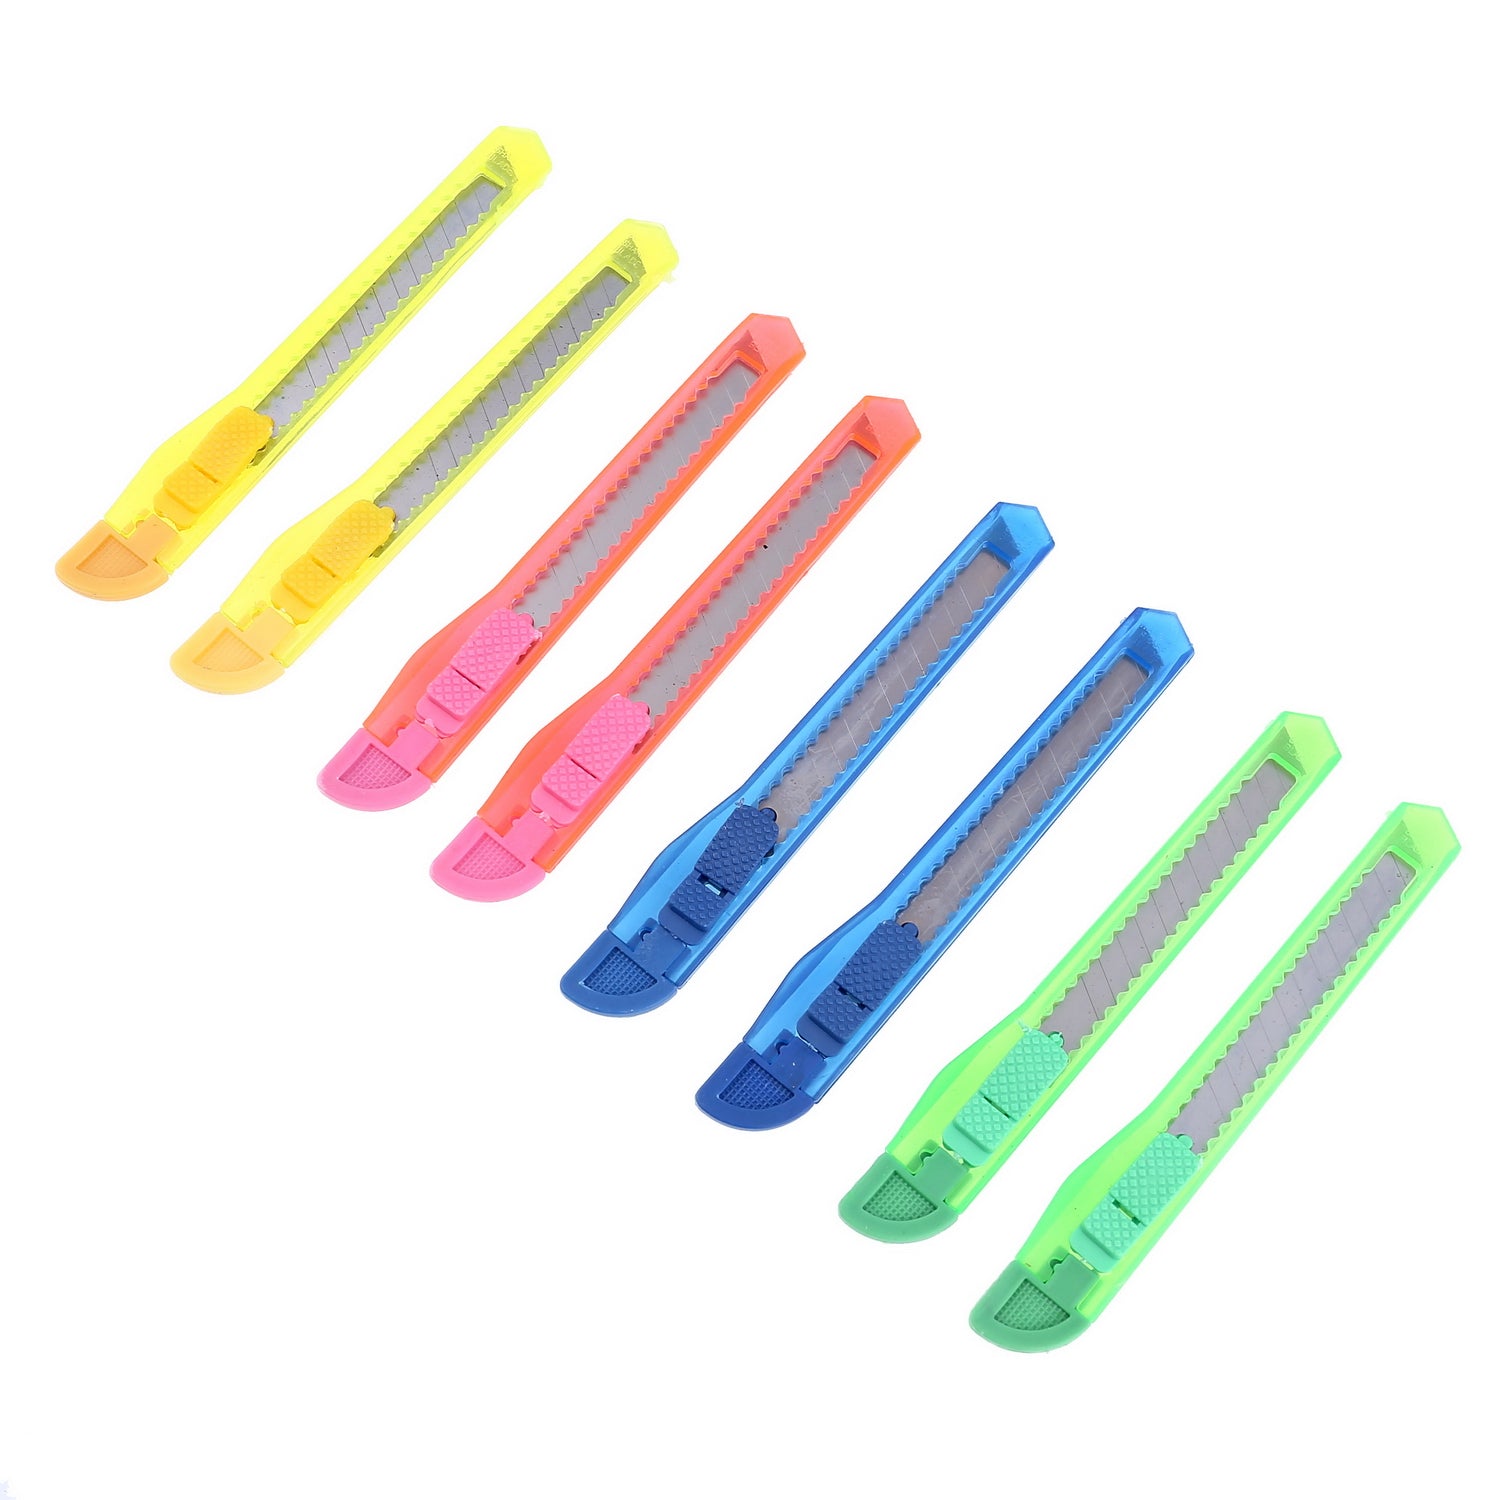 8-Piece Small Cutters Mixed Colors